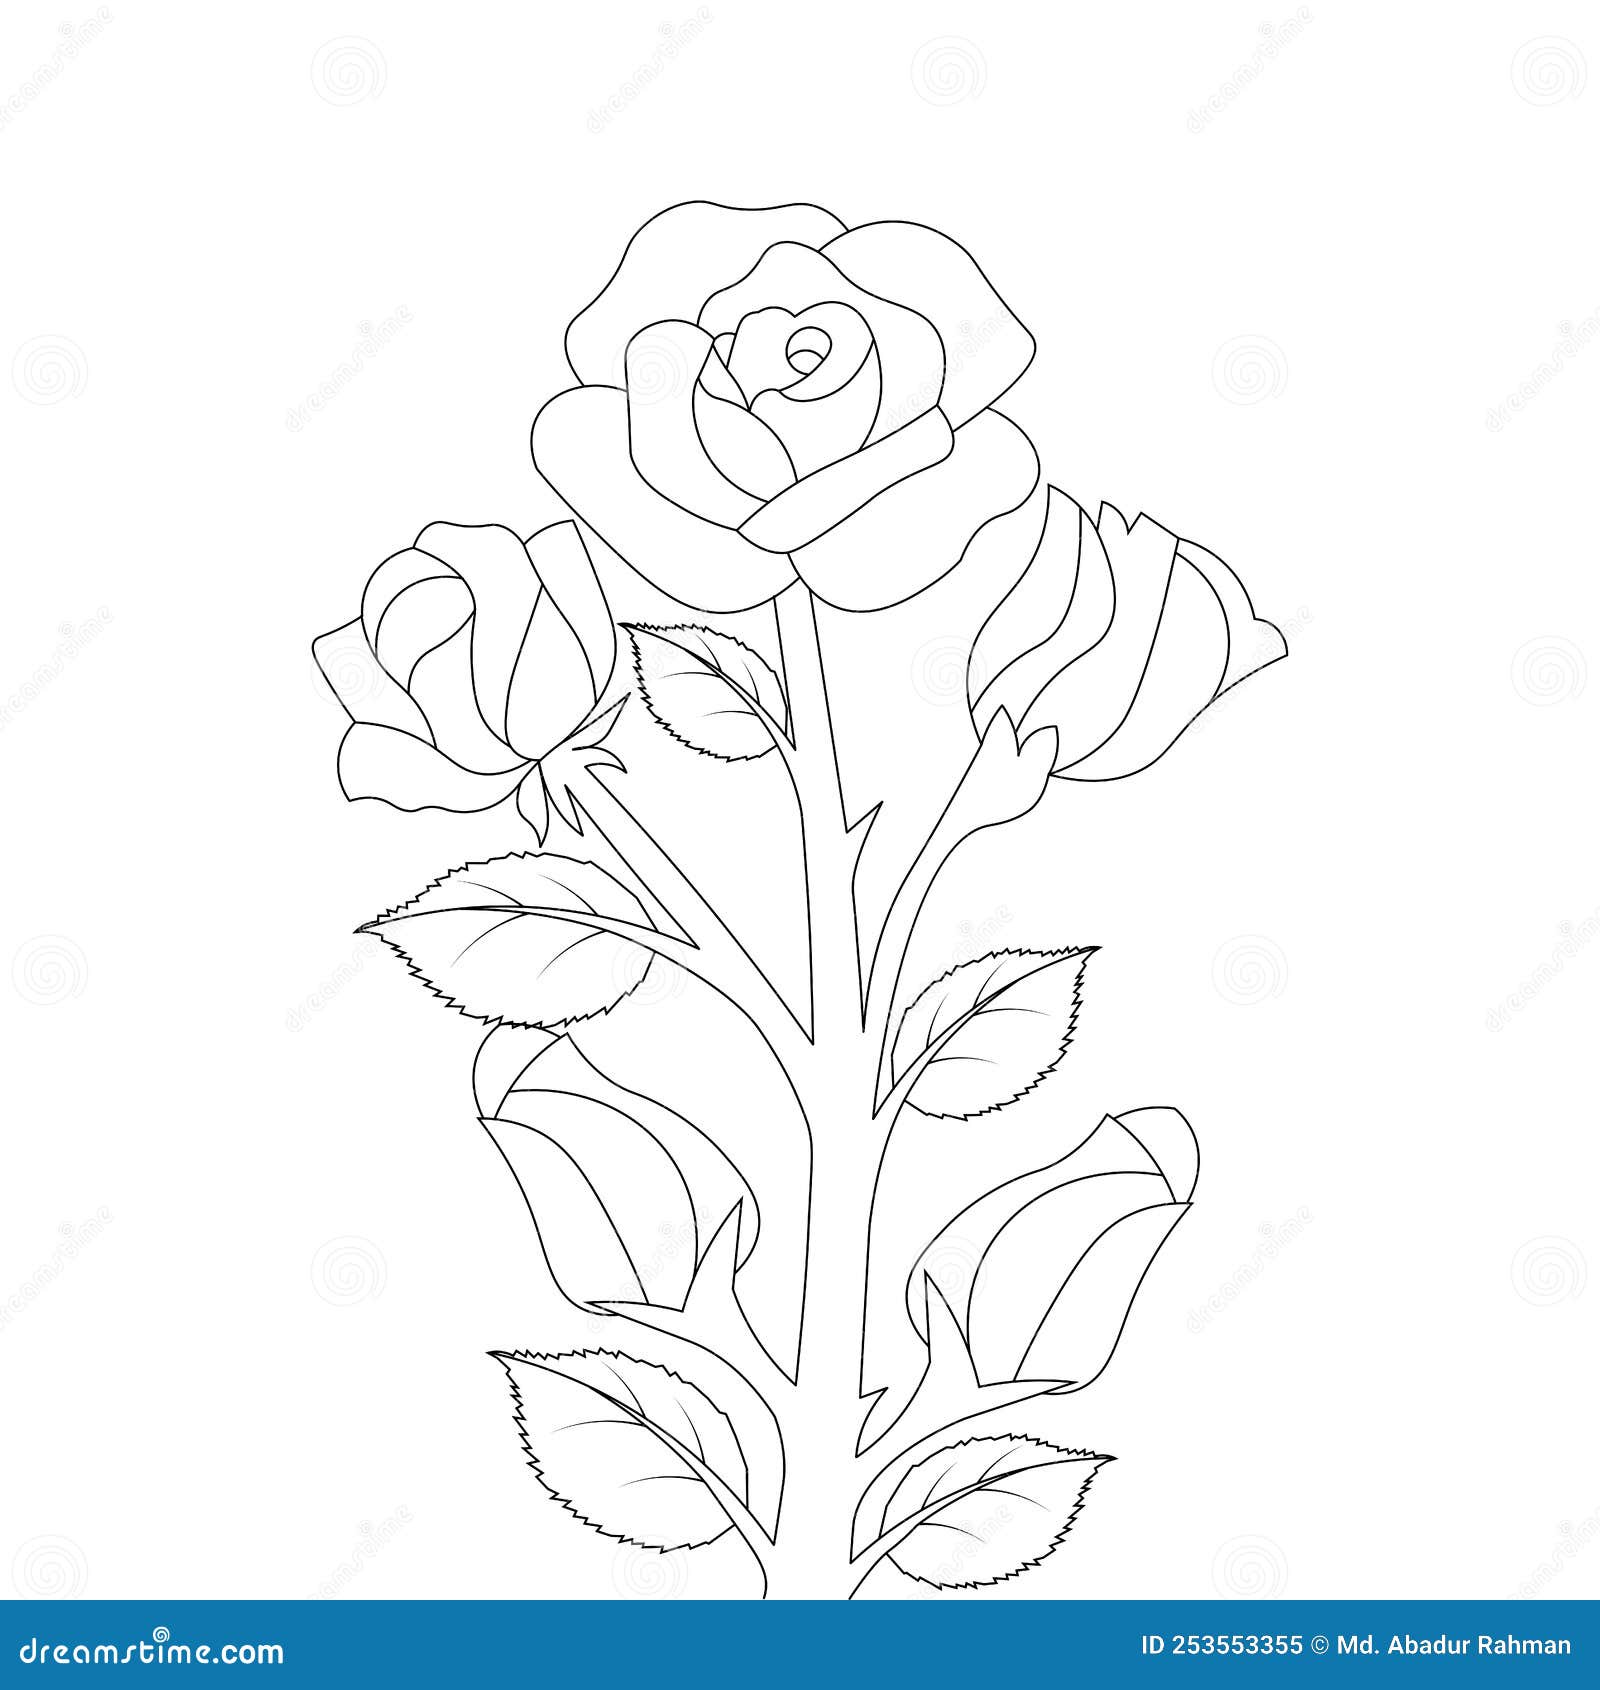 Black and White Rose Flower Coloring Book Page Illustration Artwork for ...